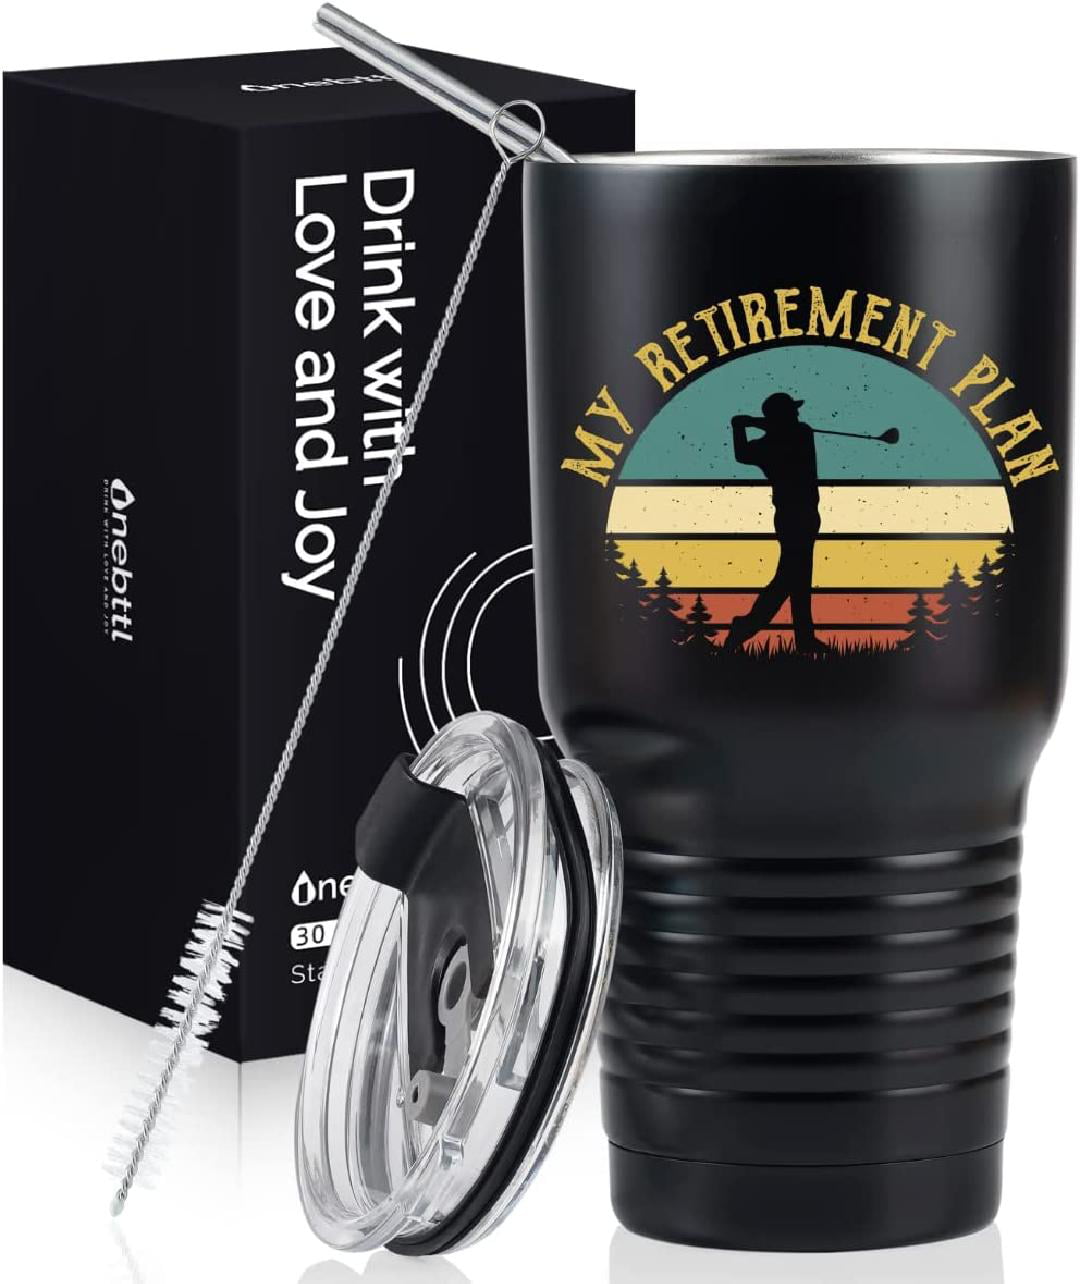 Retirement Gifts for Men Funny Tumbler Retiring Gift Ideas for Coworkers,  Boss, Dad, Friends Stainless Steel Matte Black 20 Oz Tumbler with Lid,  Water Bottle, Travel Coffee Mug Cups - Walmart.com